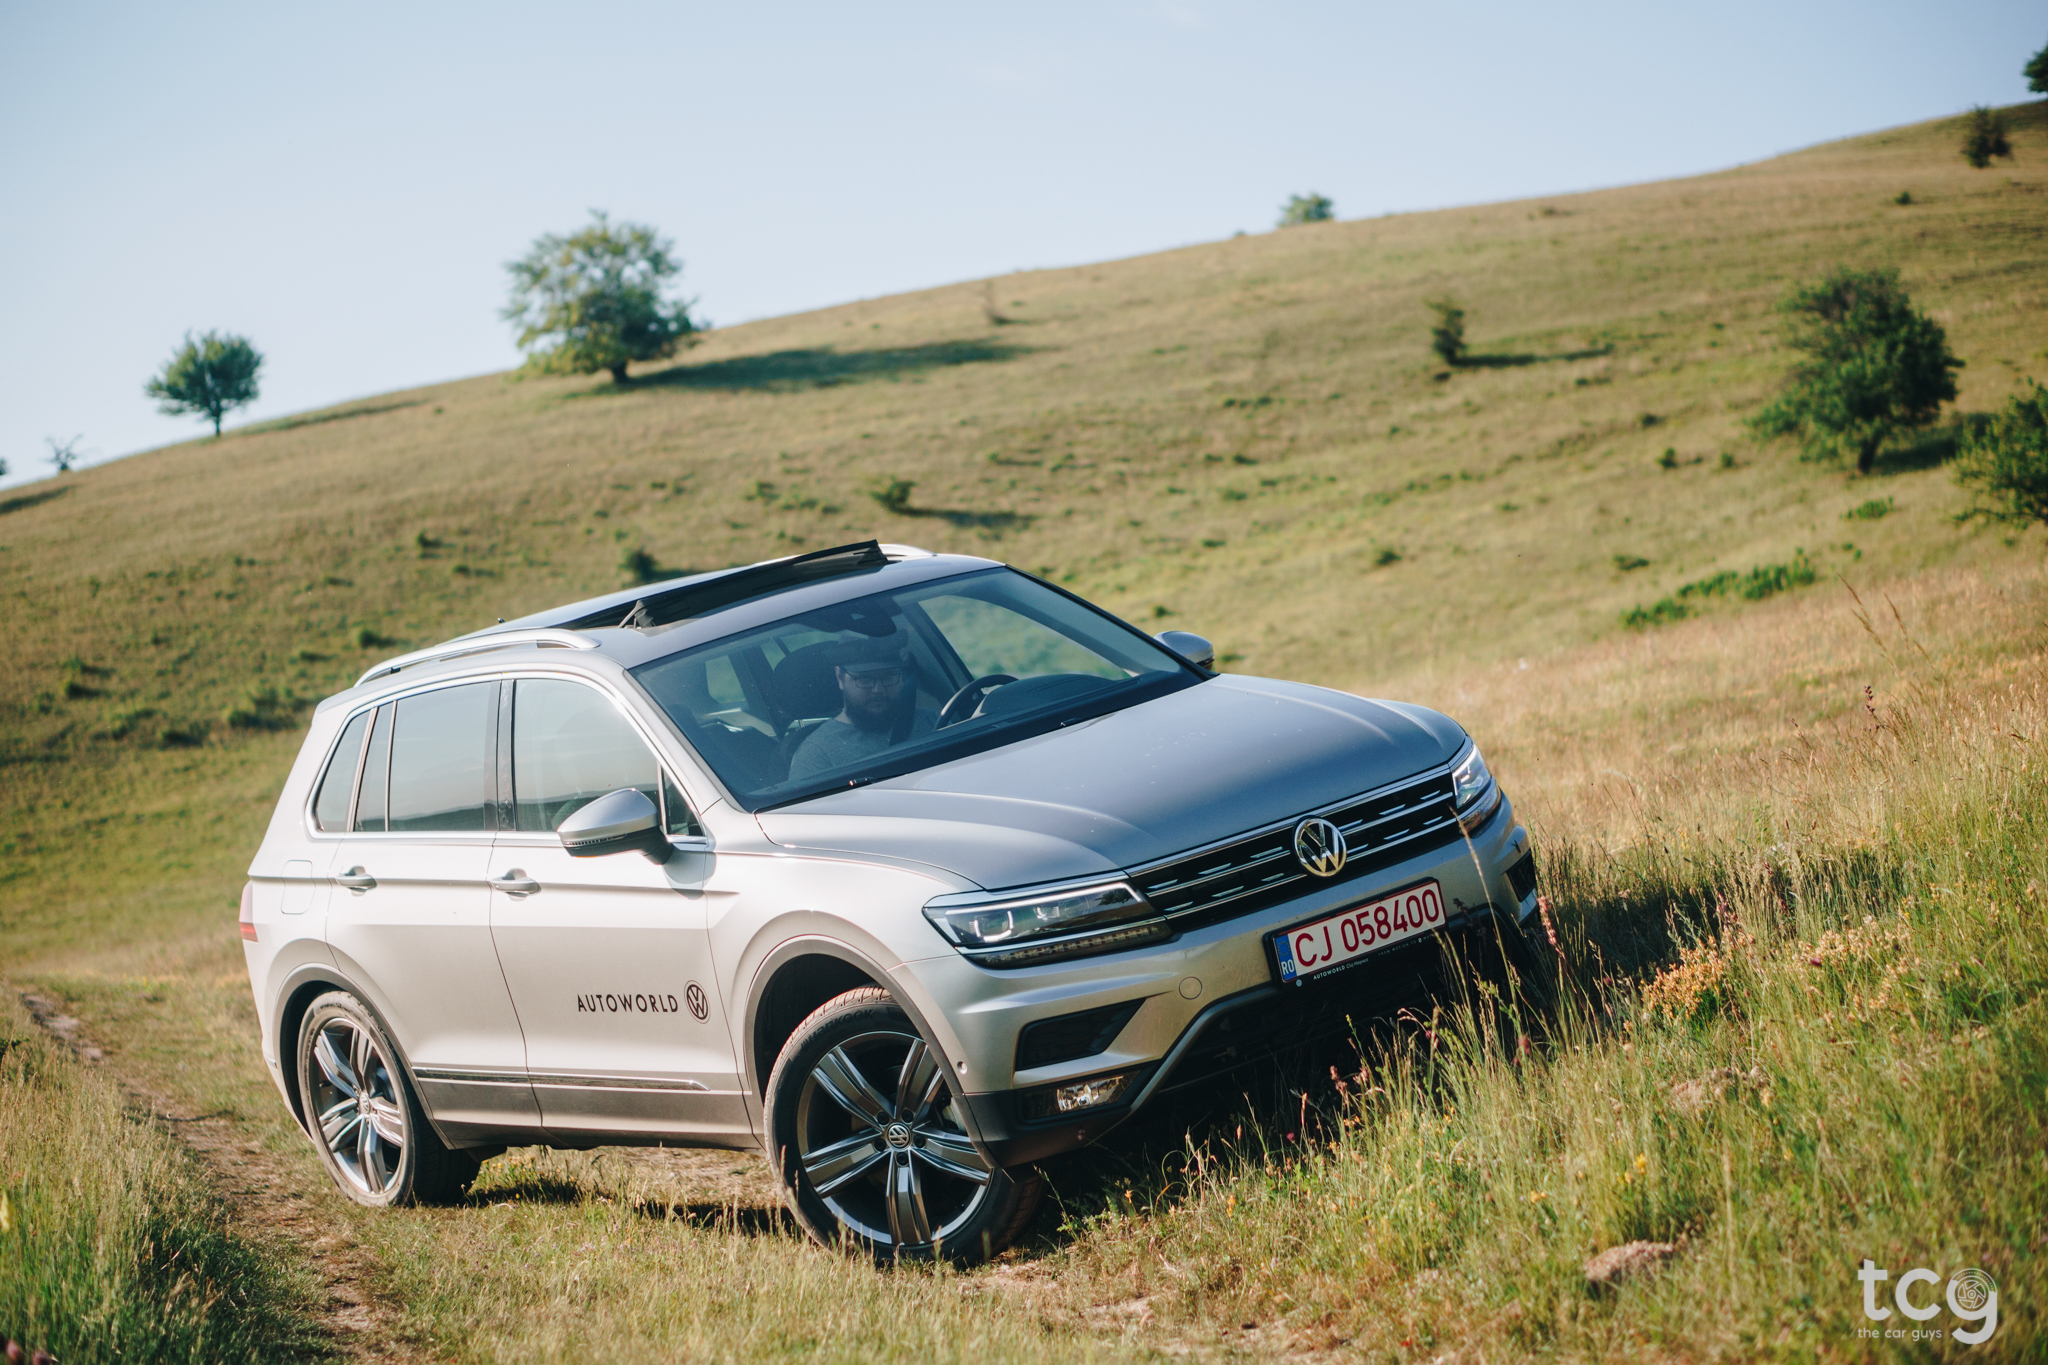 Volkswagen Tiguan (Offroad pack) - Did someone say adventure?